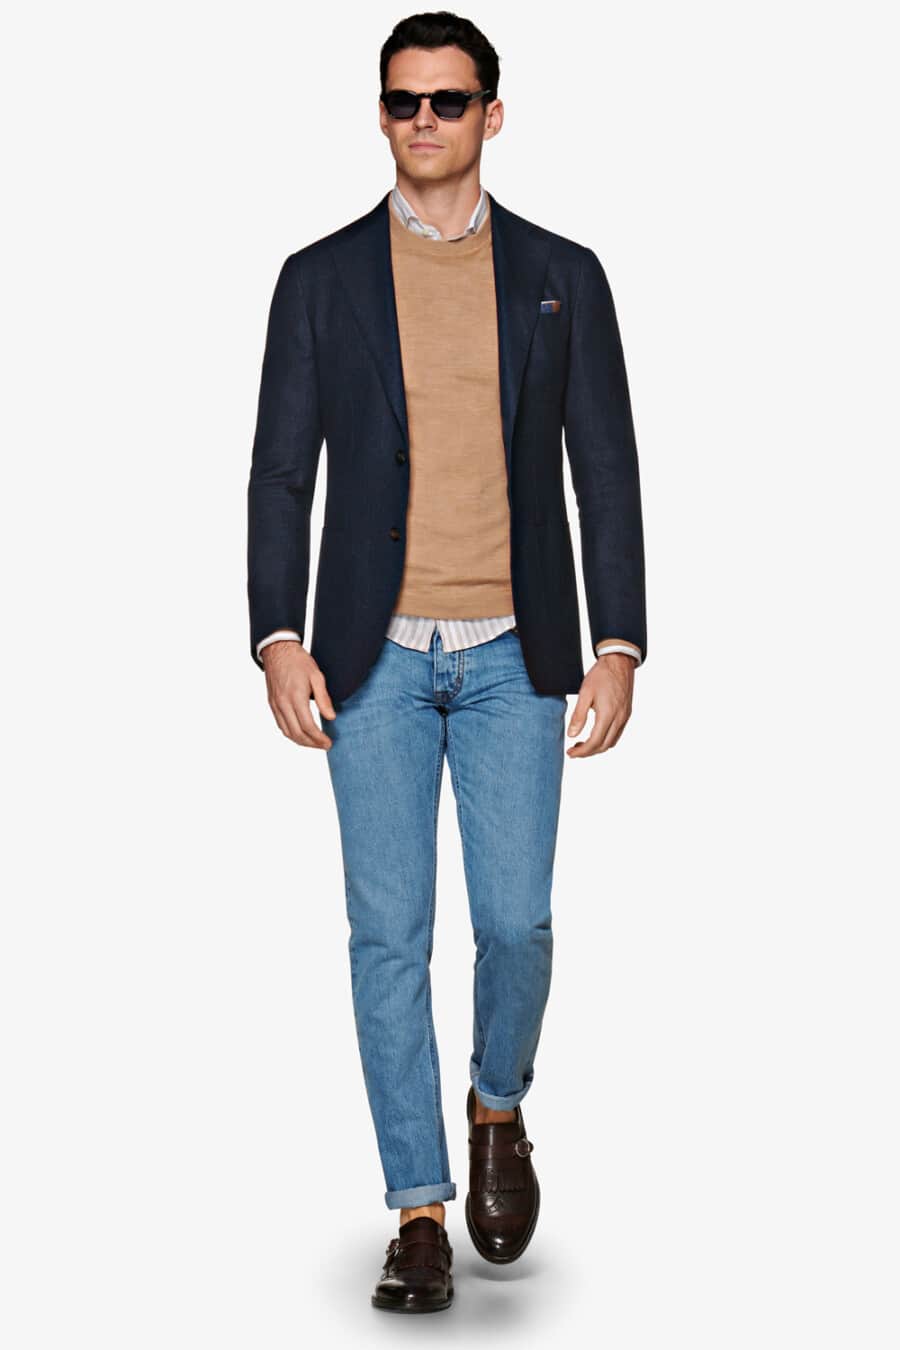 Men's Navy blazer, blue jeans, white striped shirt, camel crew-neck sweater and brown leather monk strap shoes worn sockless outfit